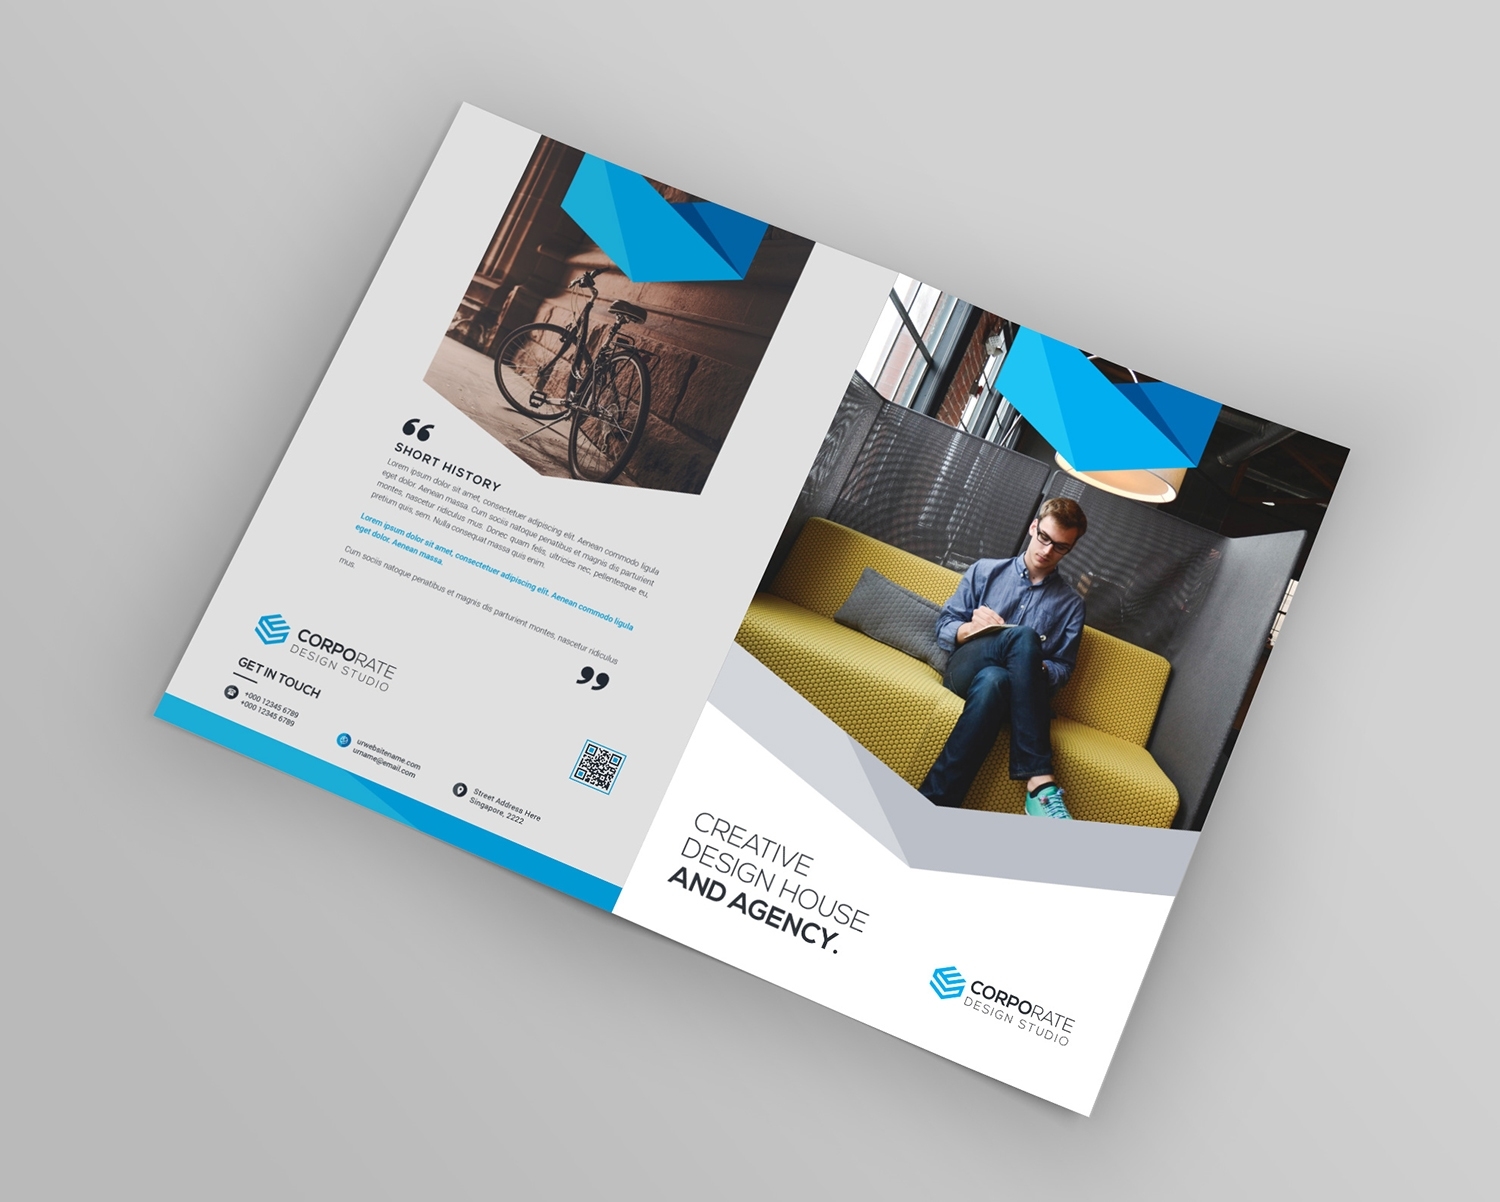 Design Professional Brochure For Your Company For $10 - Pixelclerks throughout Professional Brochure Design Templates